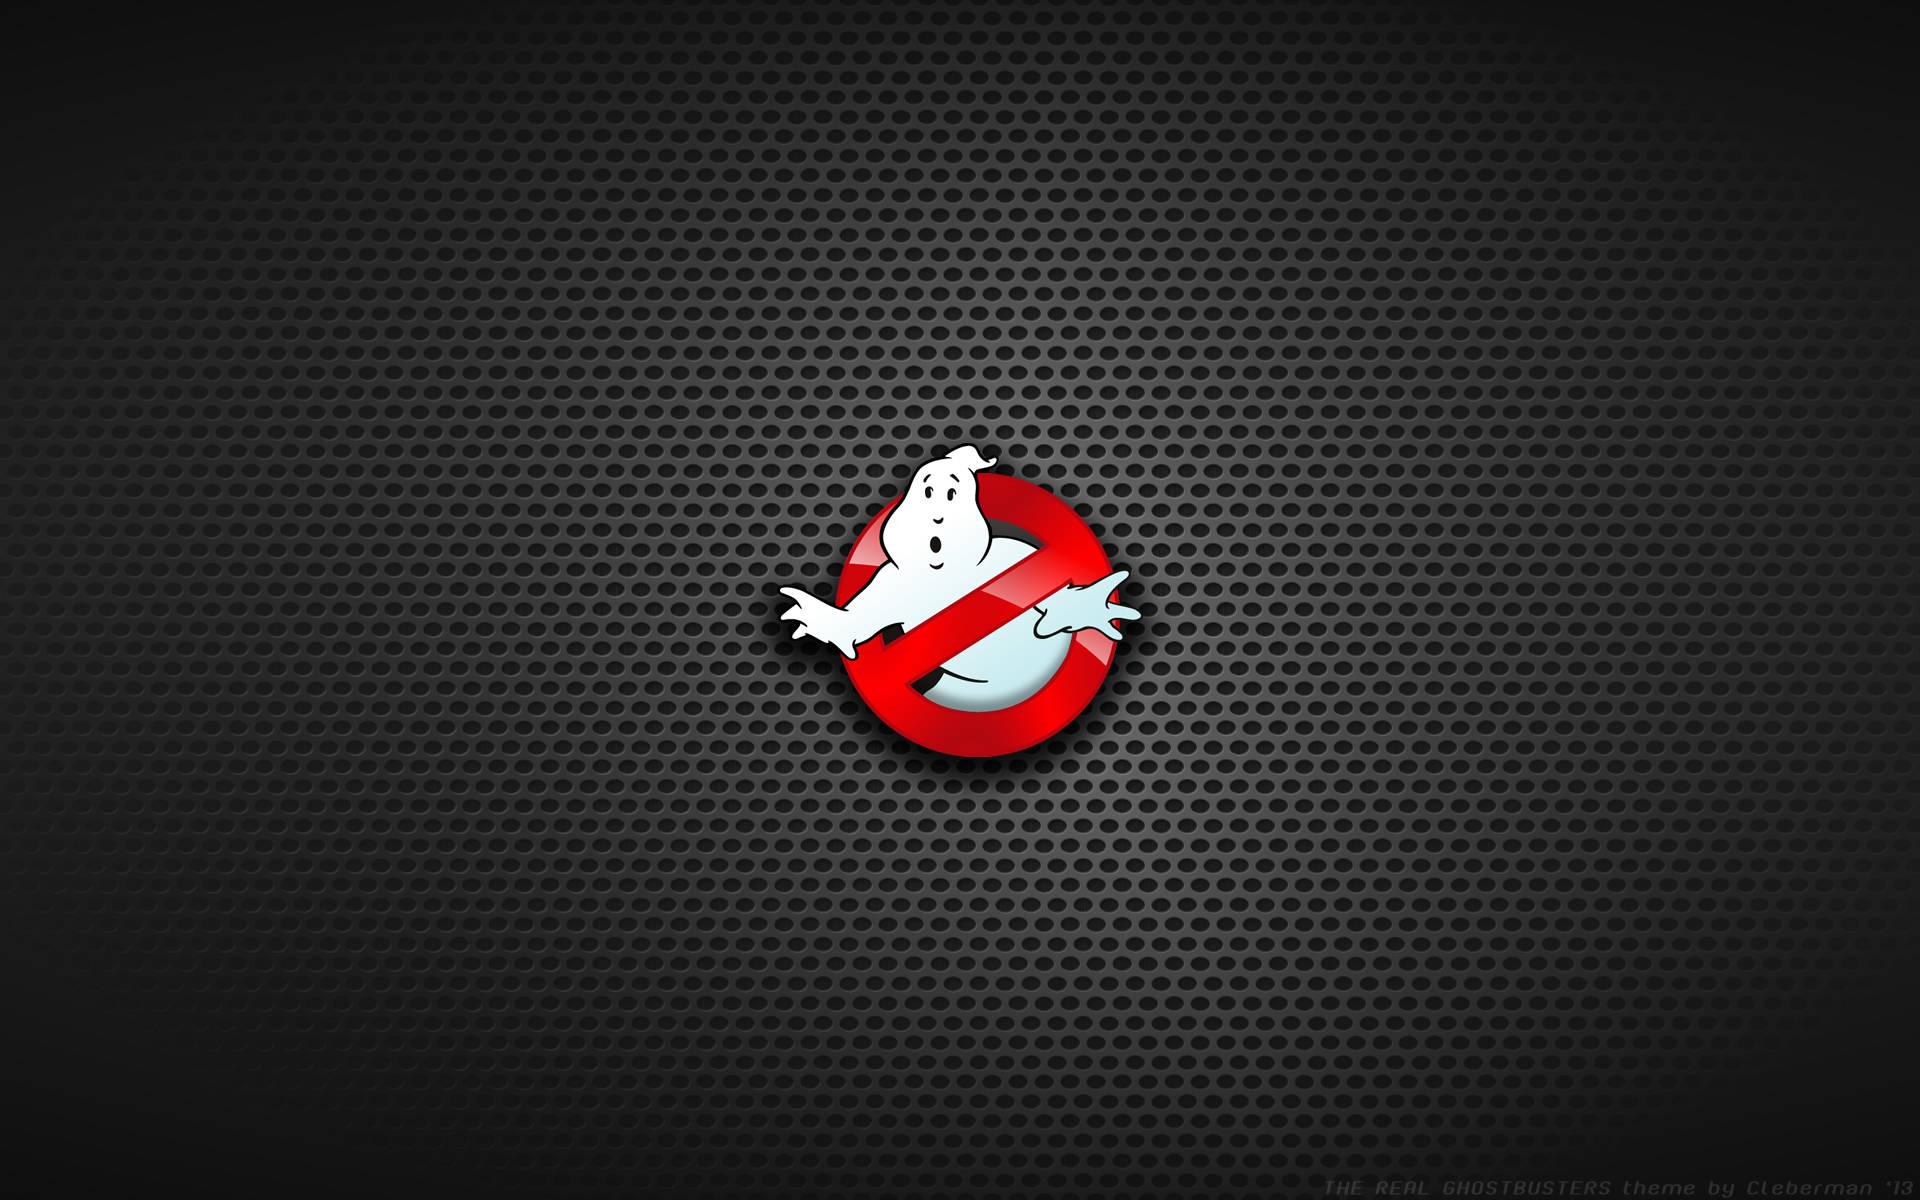 Ghostbusters Dotted Logo Background